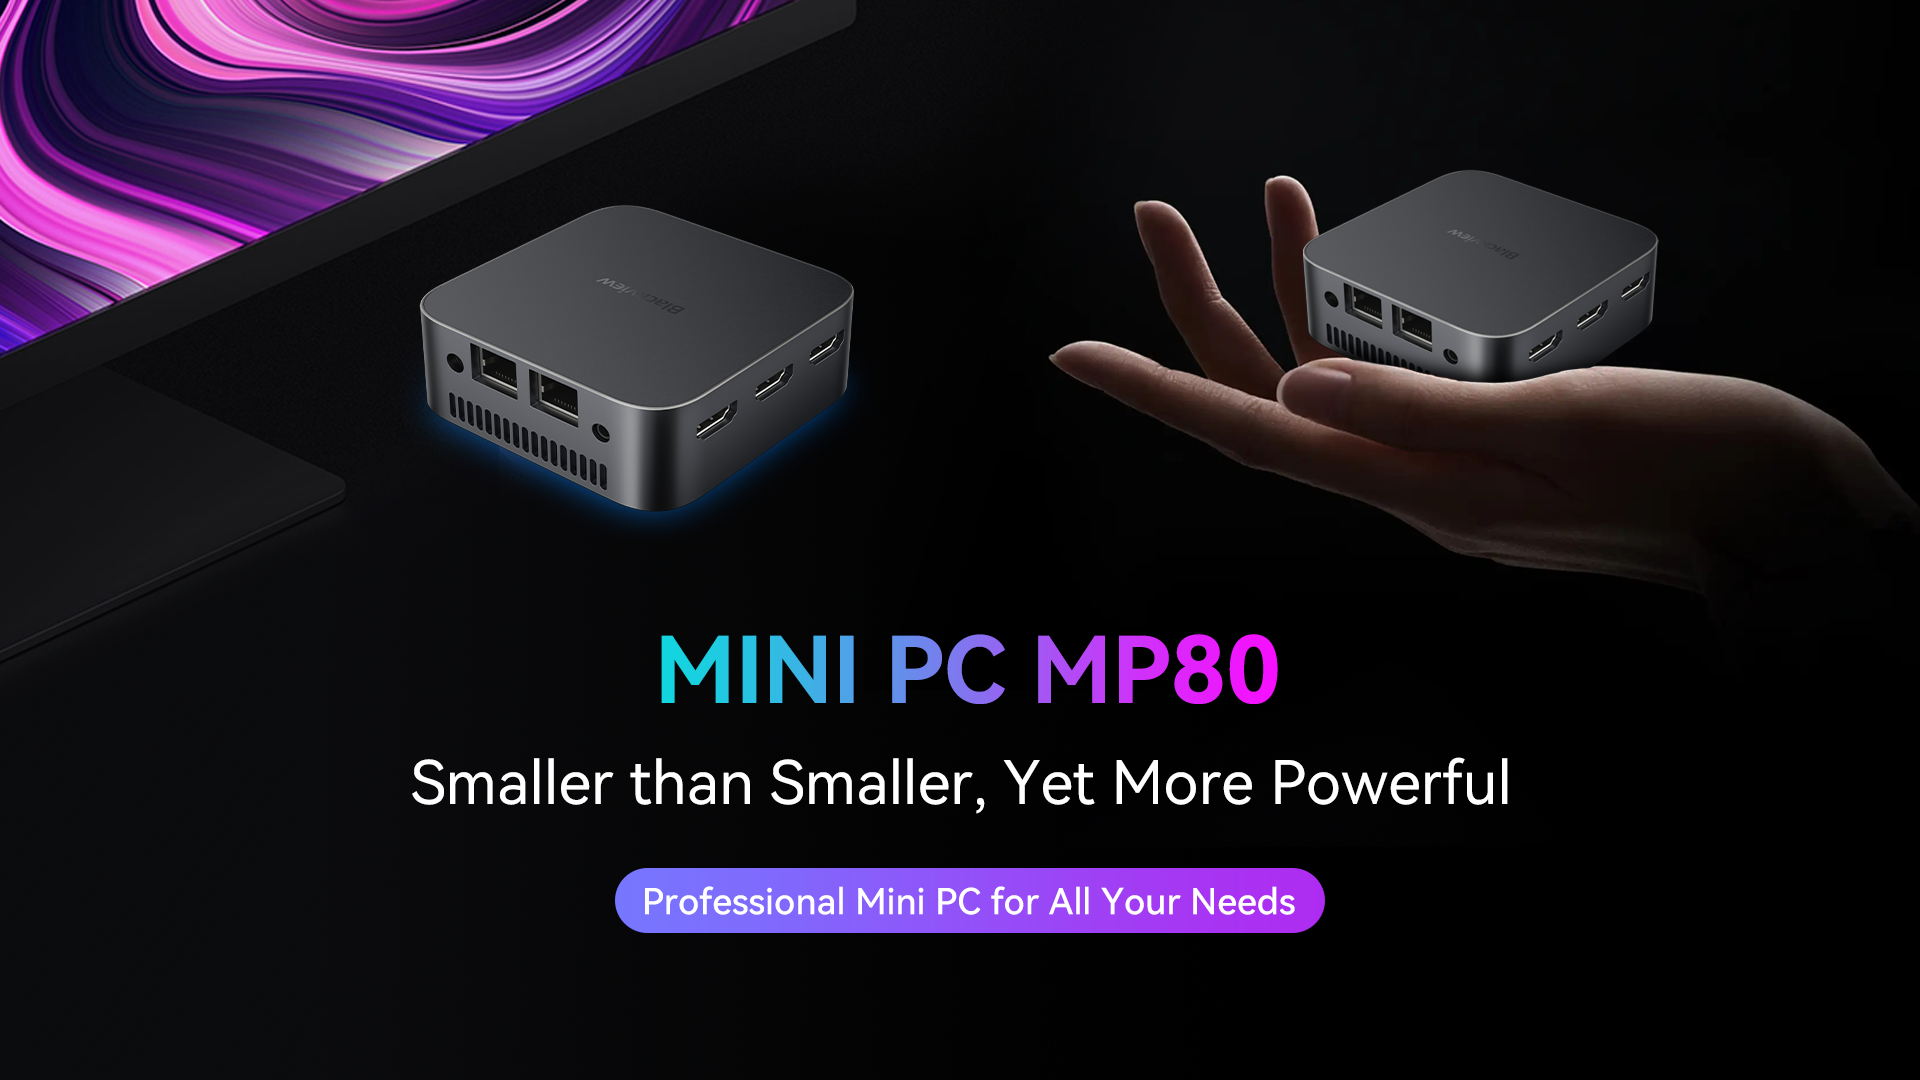 This One SURPRISED Me! Blackview MP80 Mini PC Review 